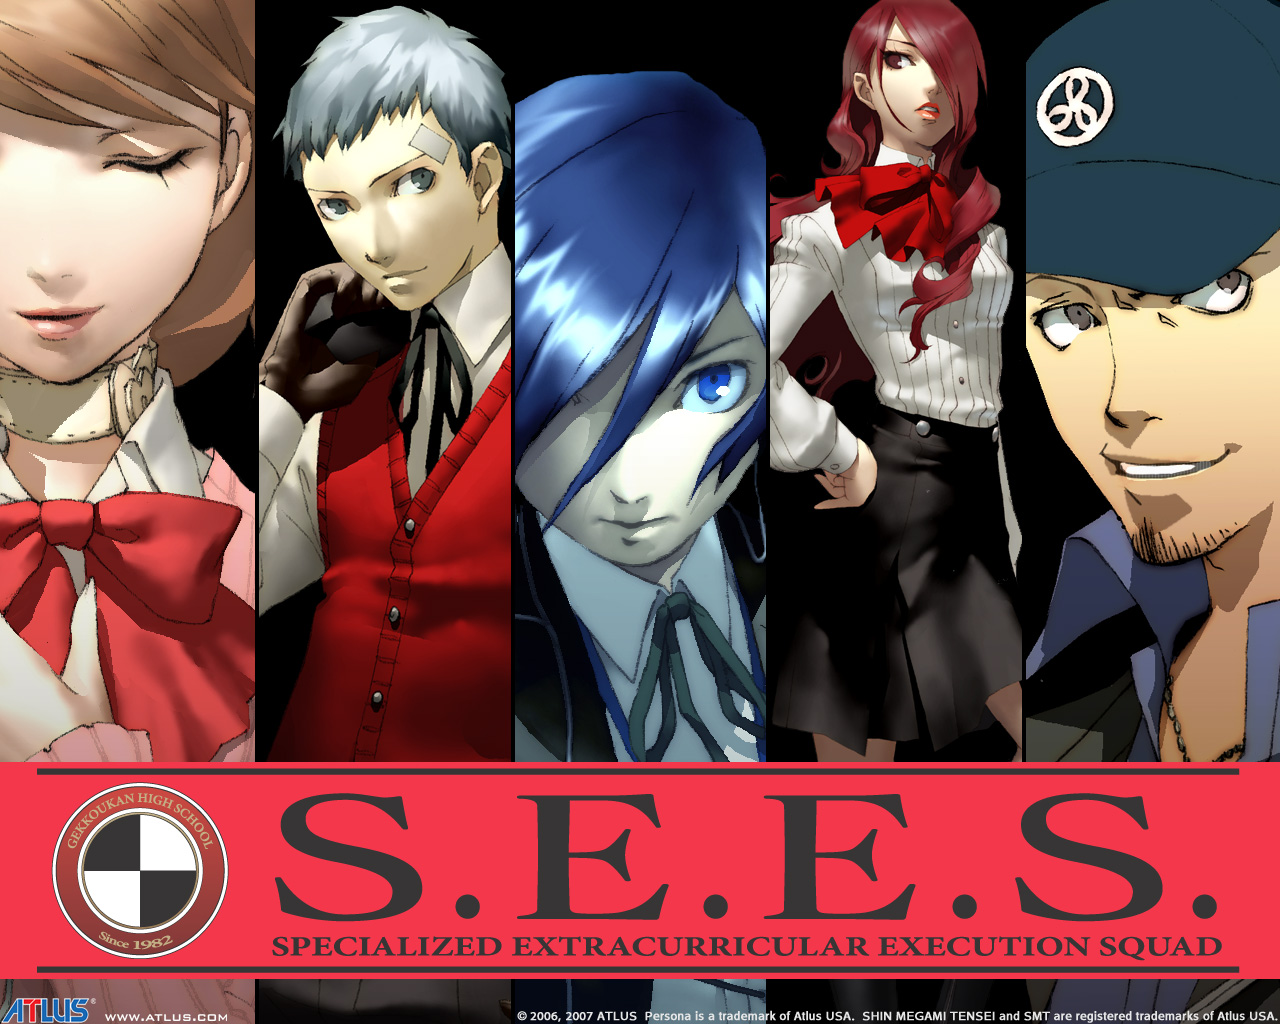 Persona 3 fes widescreen patch download torrent